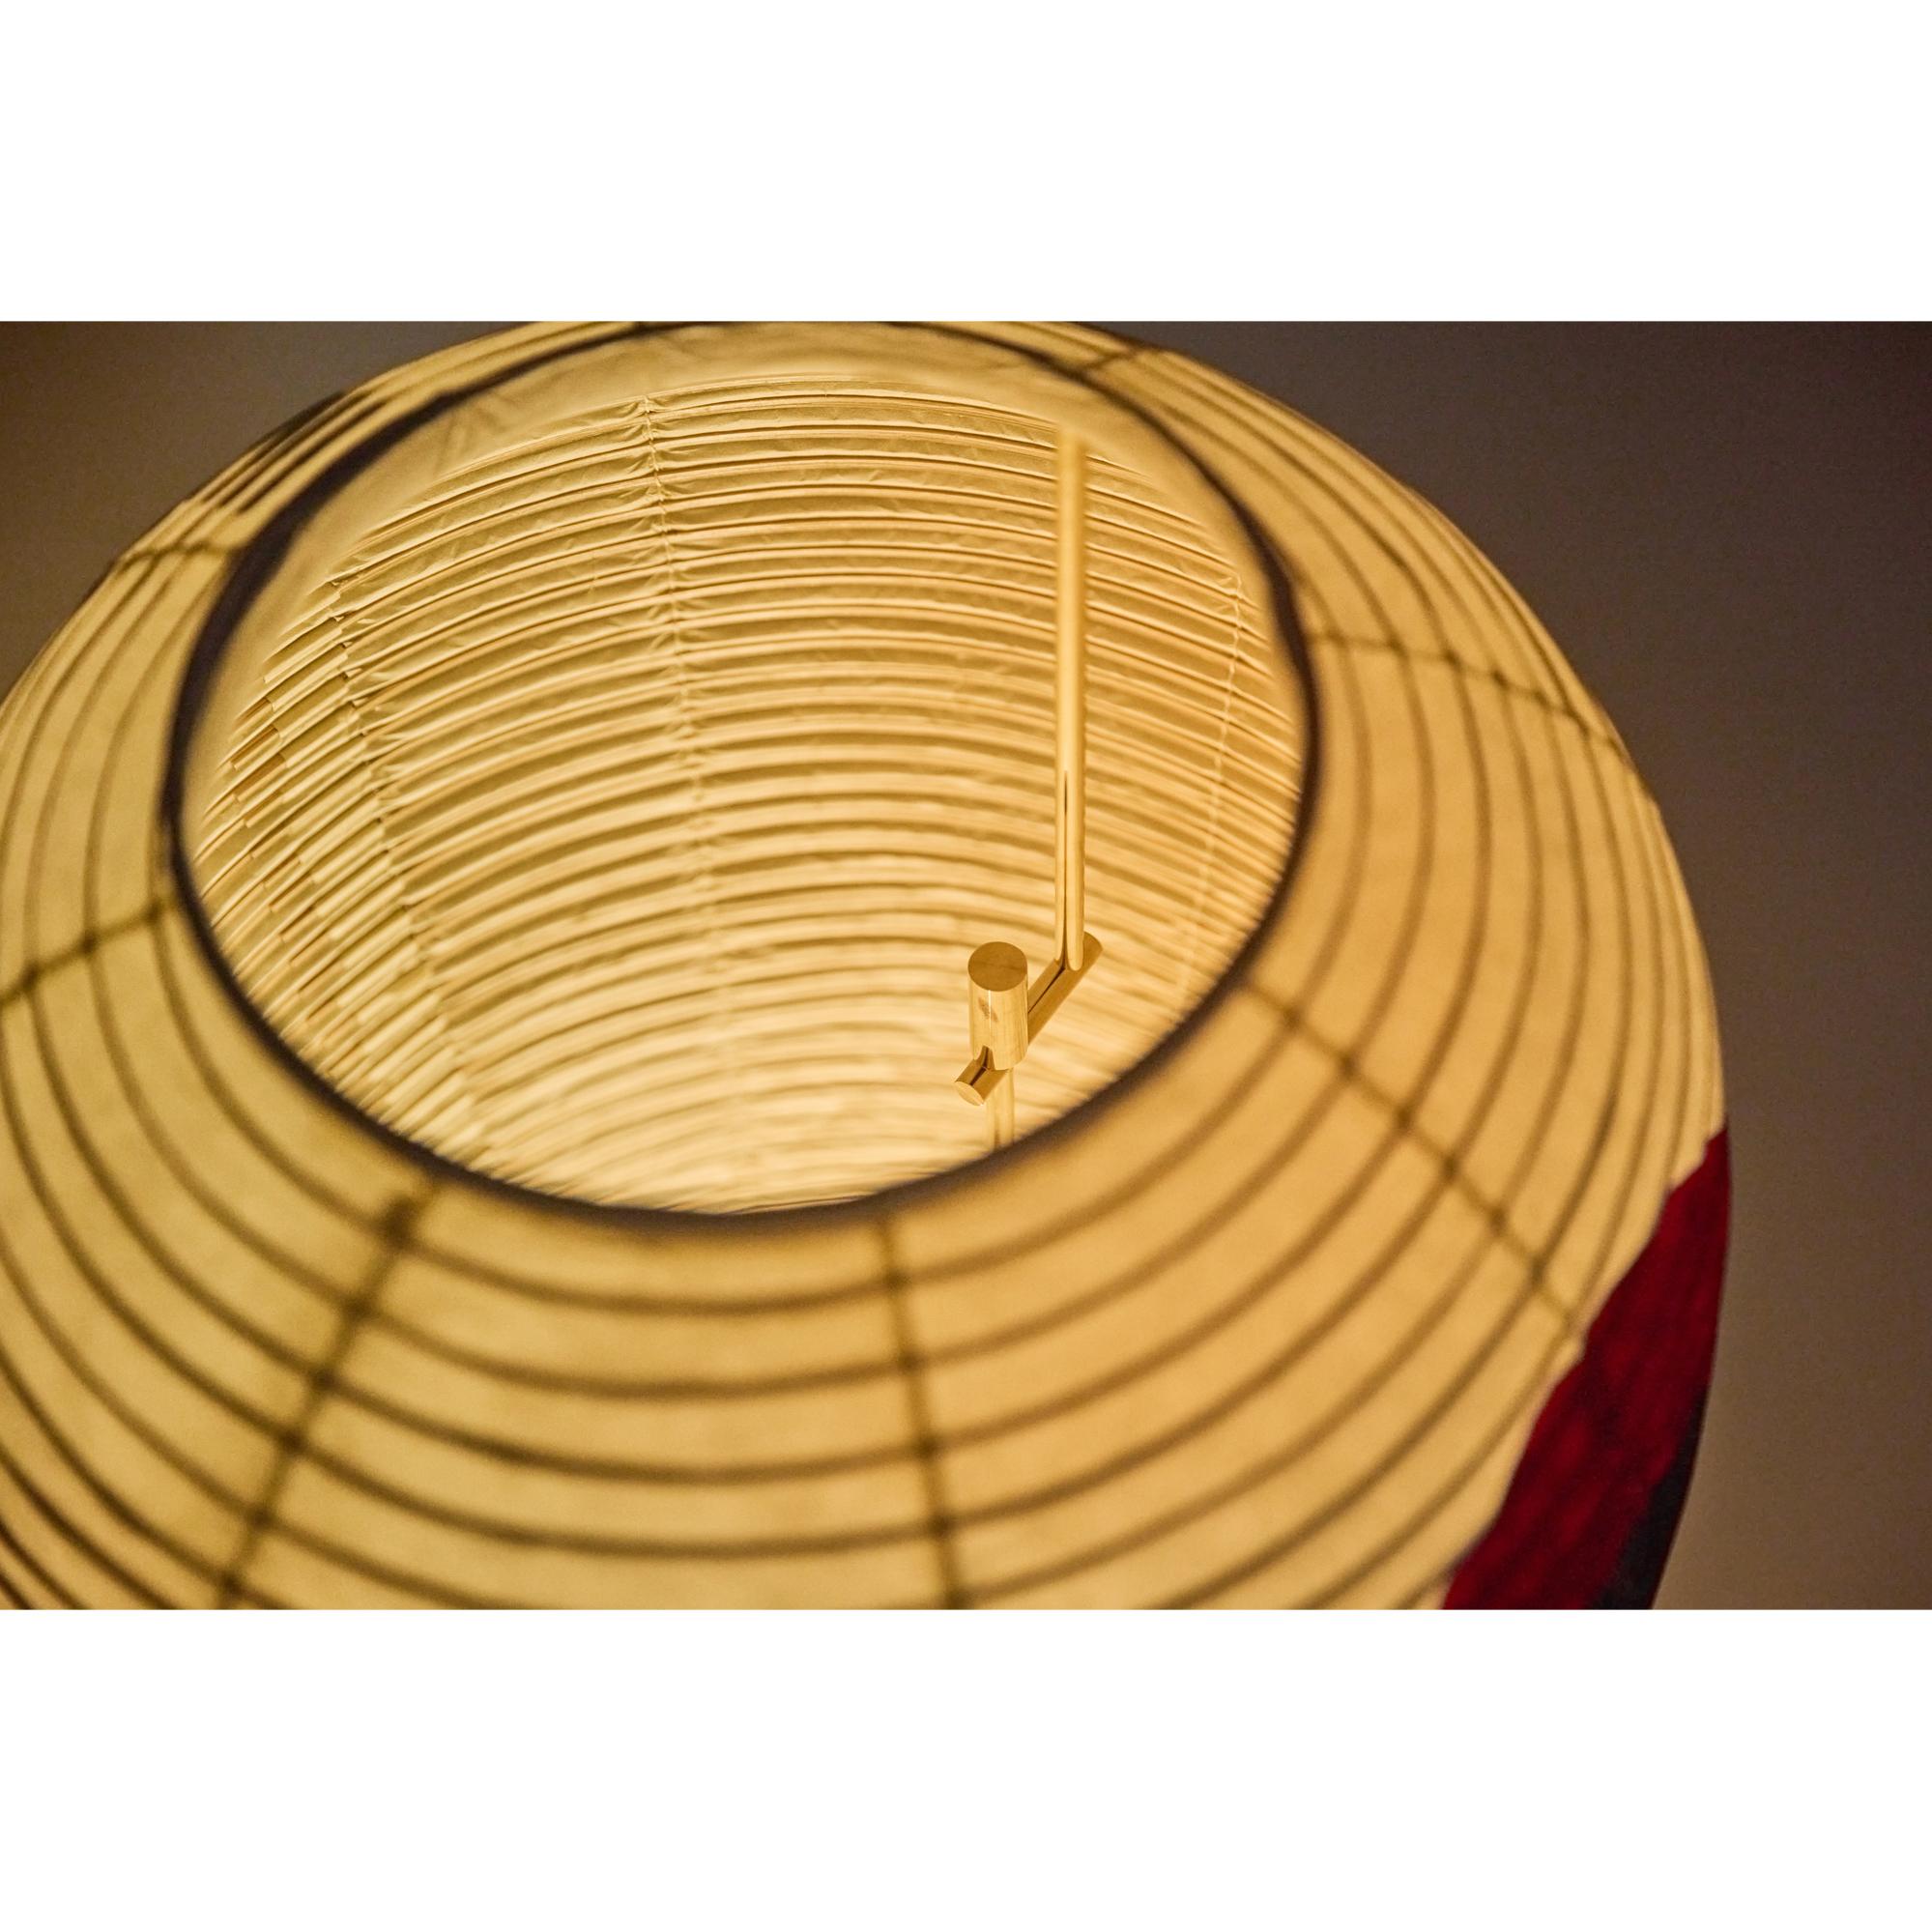 Contemporary Japanese Chochin Floor Lamp Limited Edition #1 Zen Washi In New Condition For Sale In Shibuya-ku, Tokyo